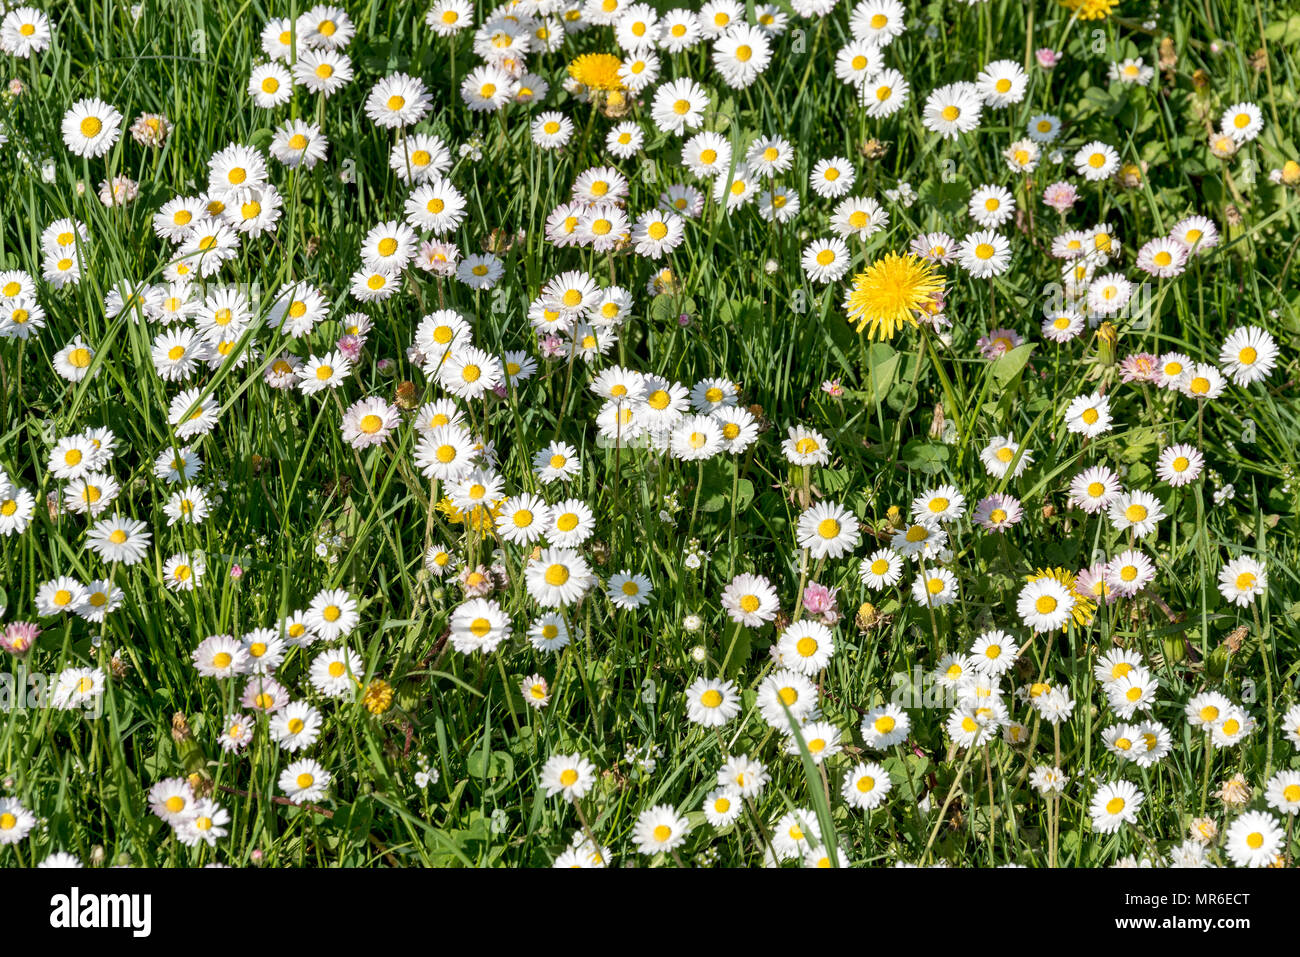 Common daisies (Bellis perennis) in a meadow, Upper Bavaria, Bavaria, Germany Stock Photo